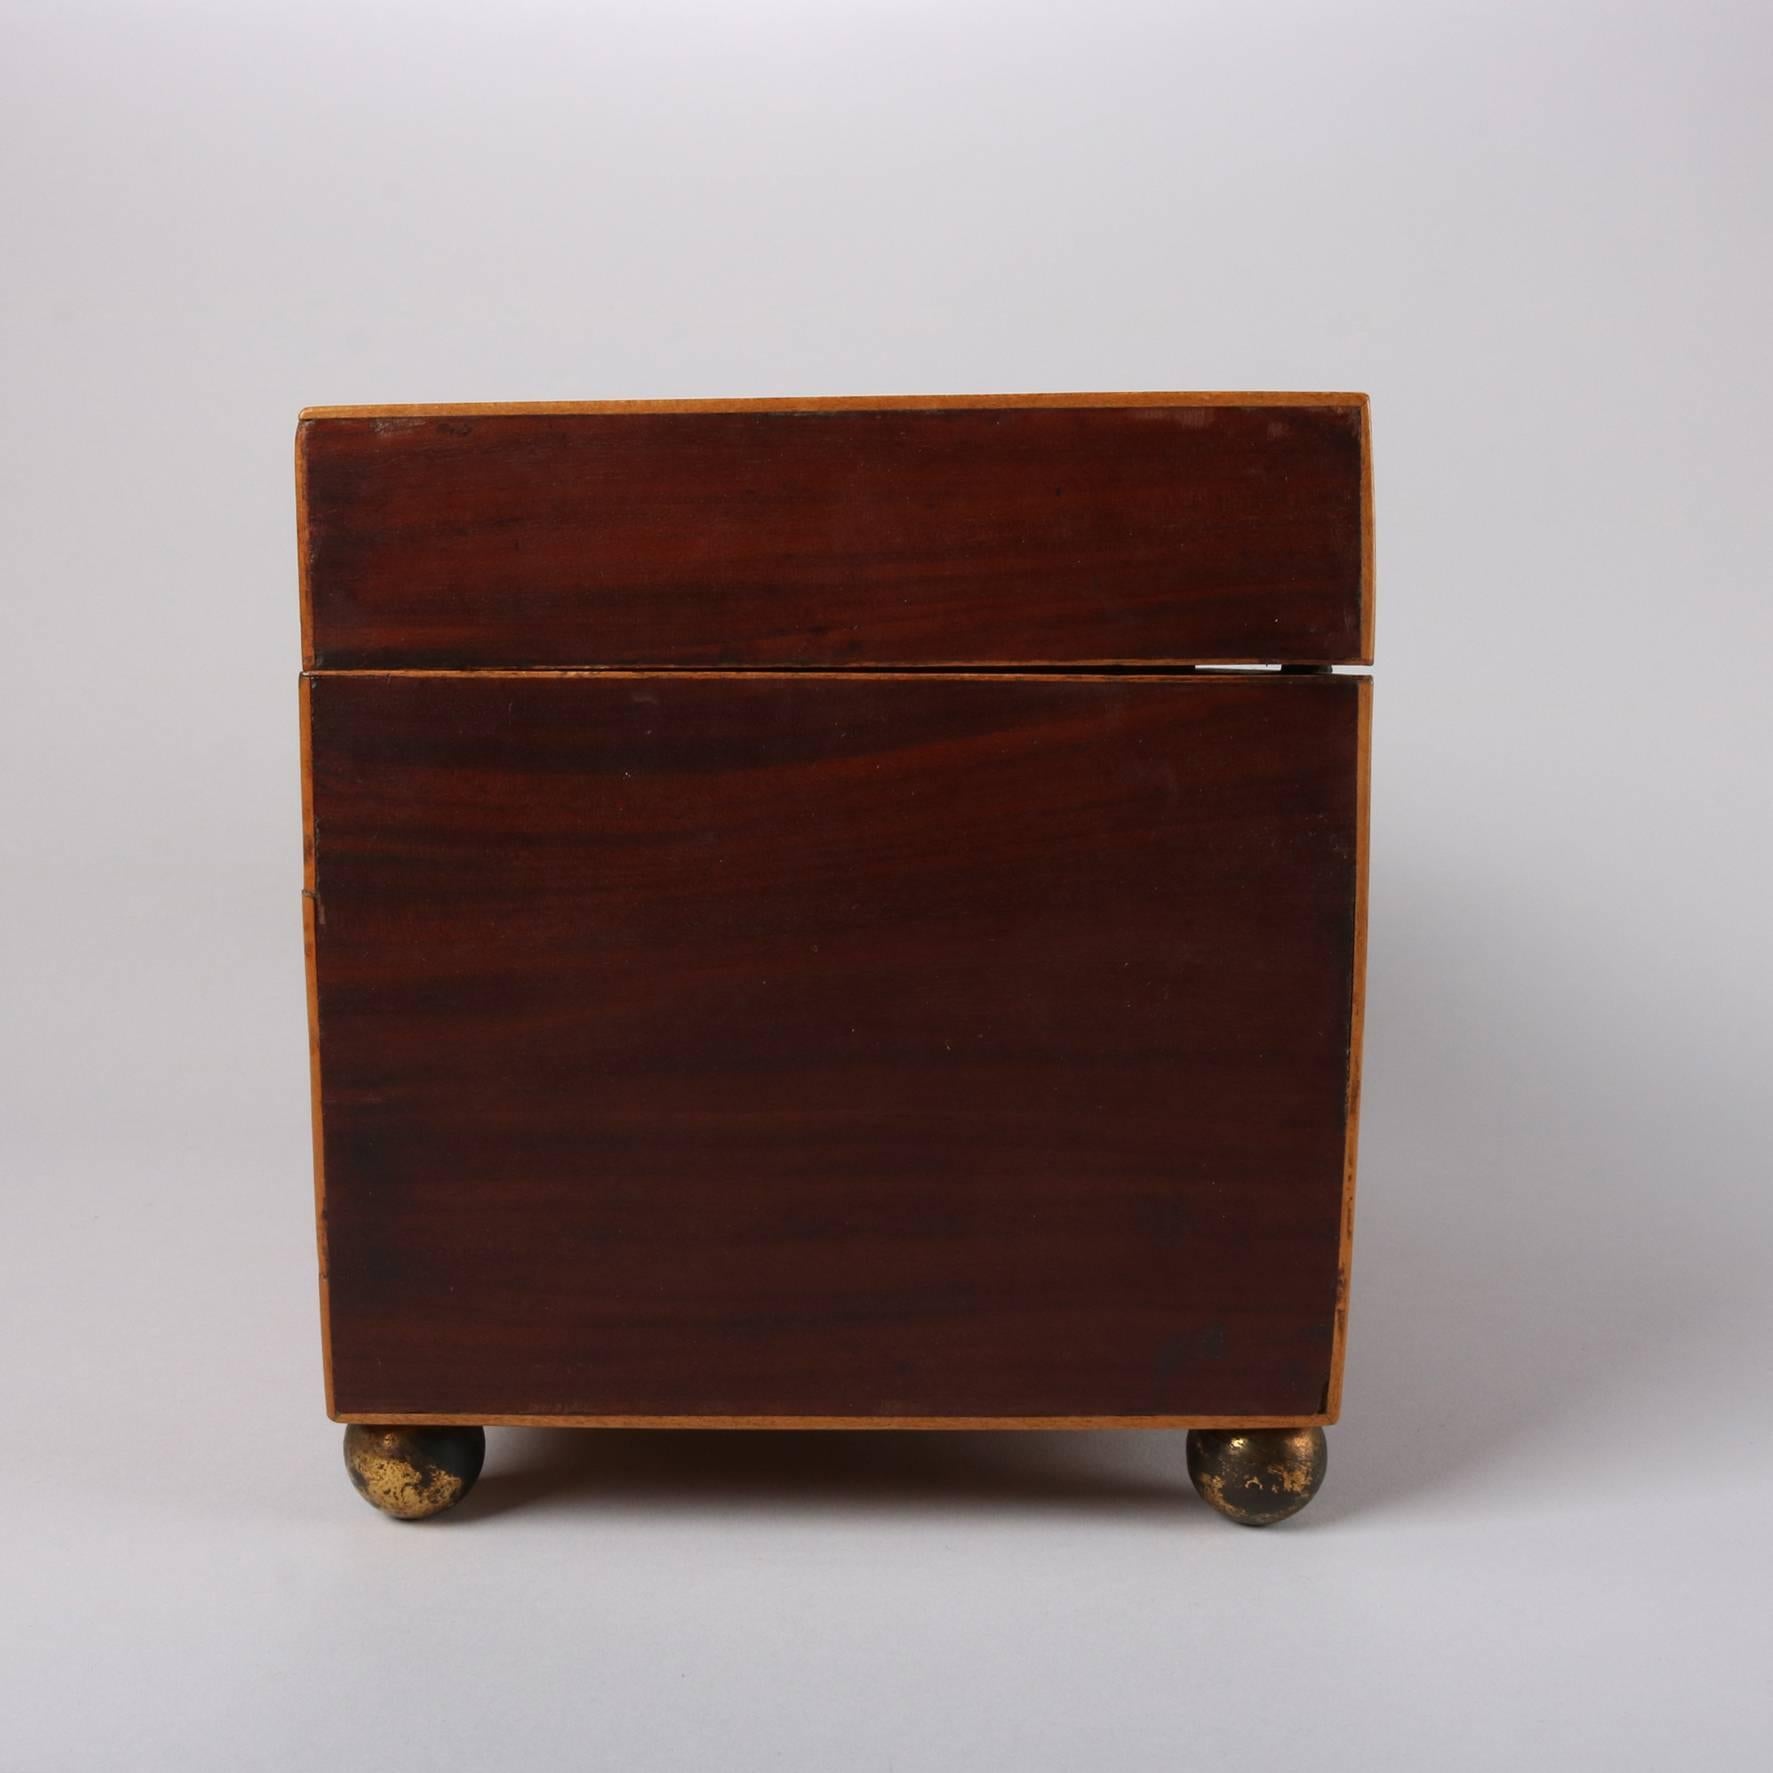 19th Century Antique English Edwardian Mahogany and Satinwood Tea Caddy with Cobalt Bowl